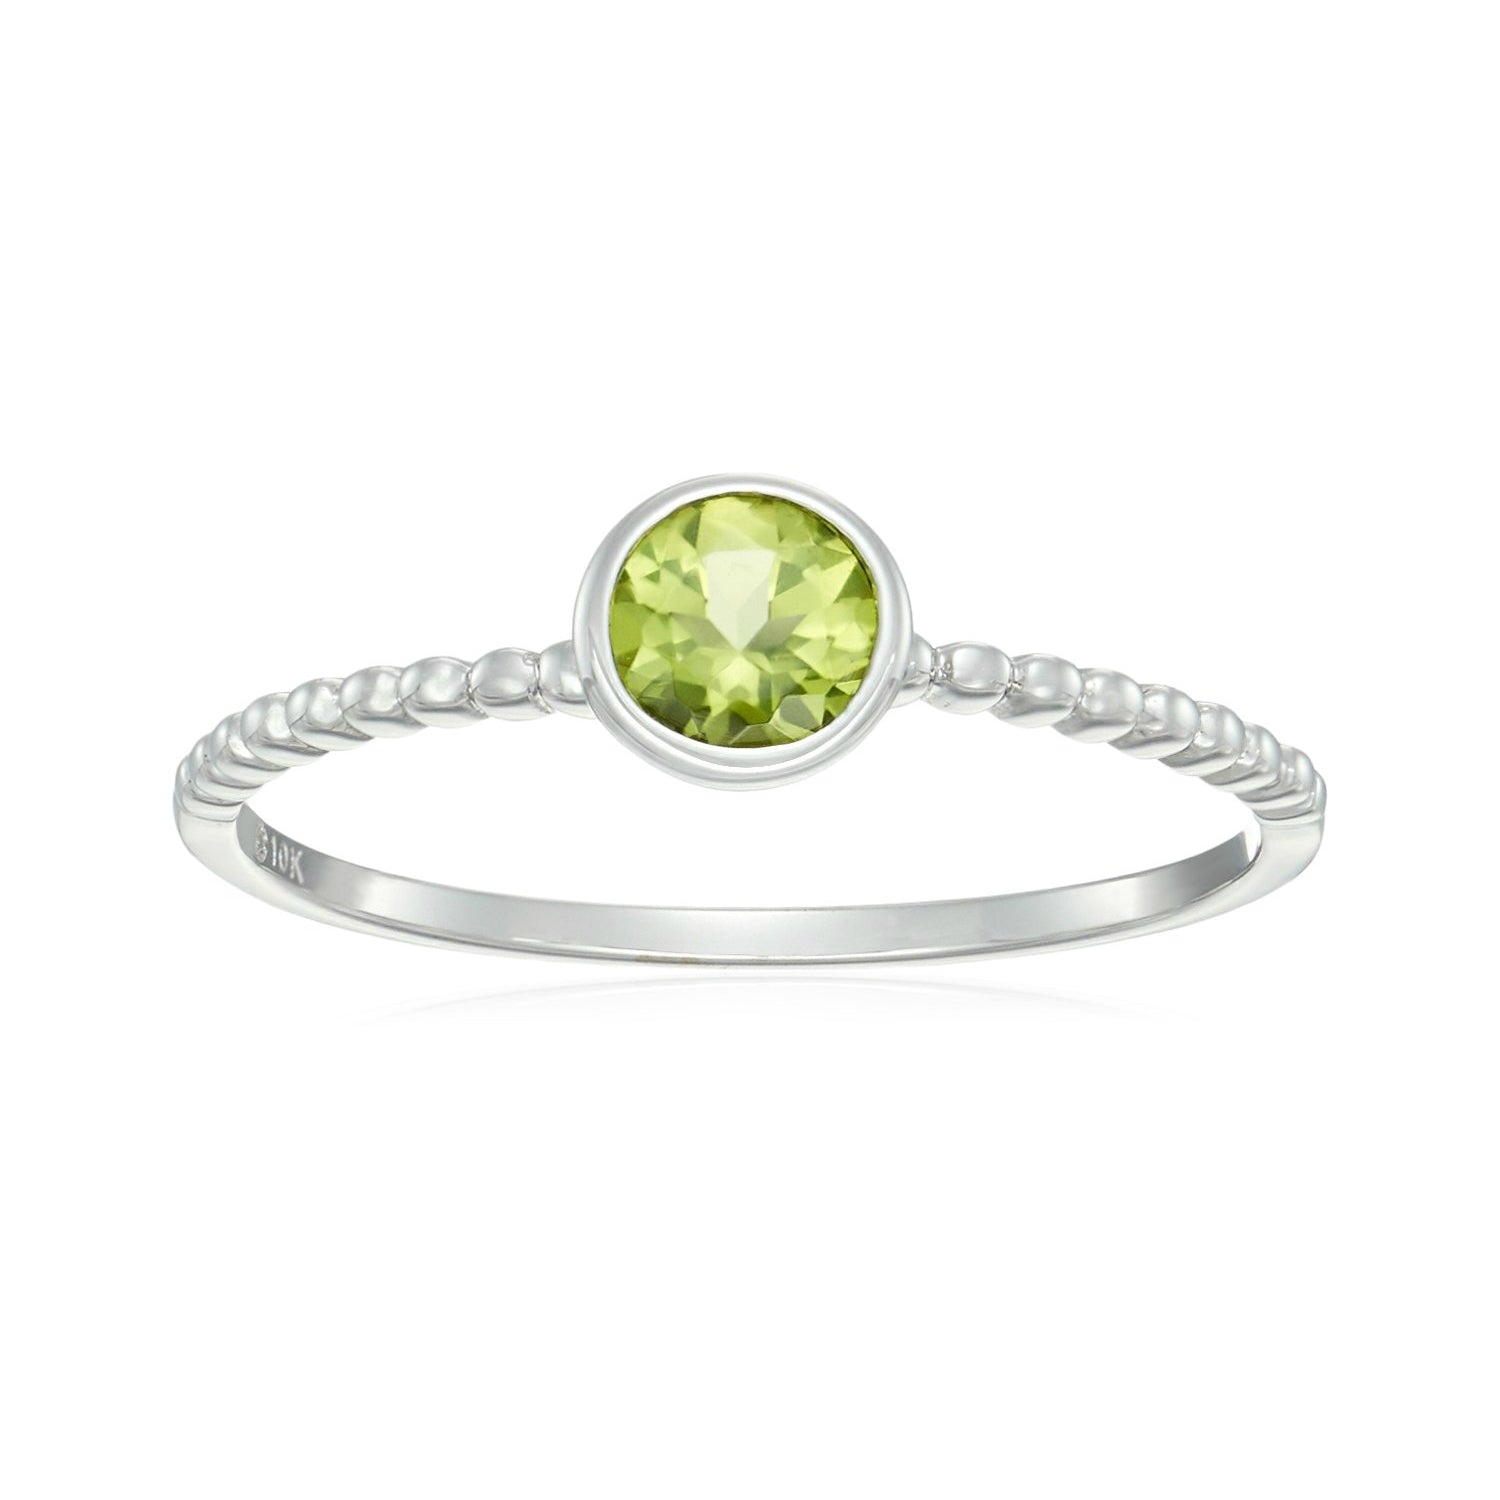 10k White Gold Peridot Solitaire Beaded Shank Stackable Ring - pinctore